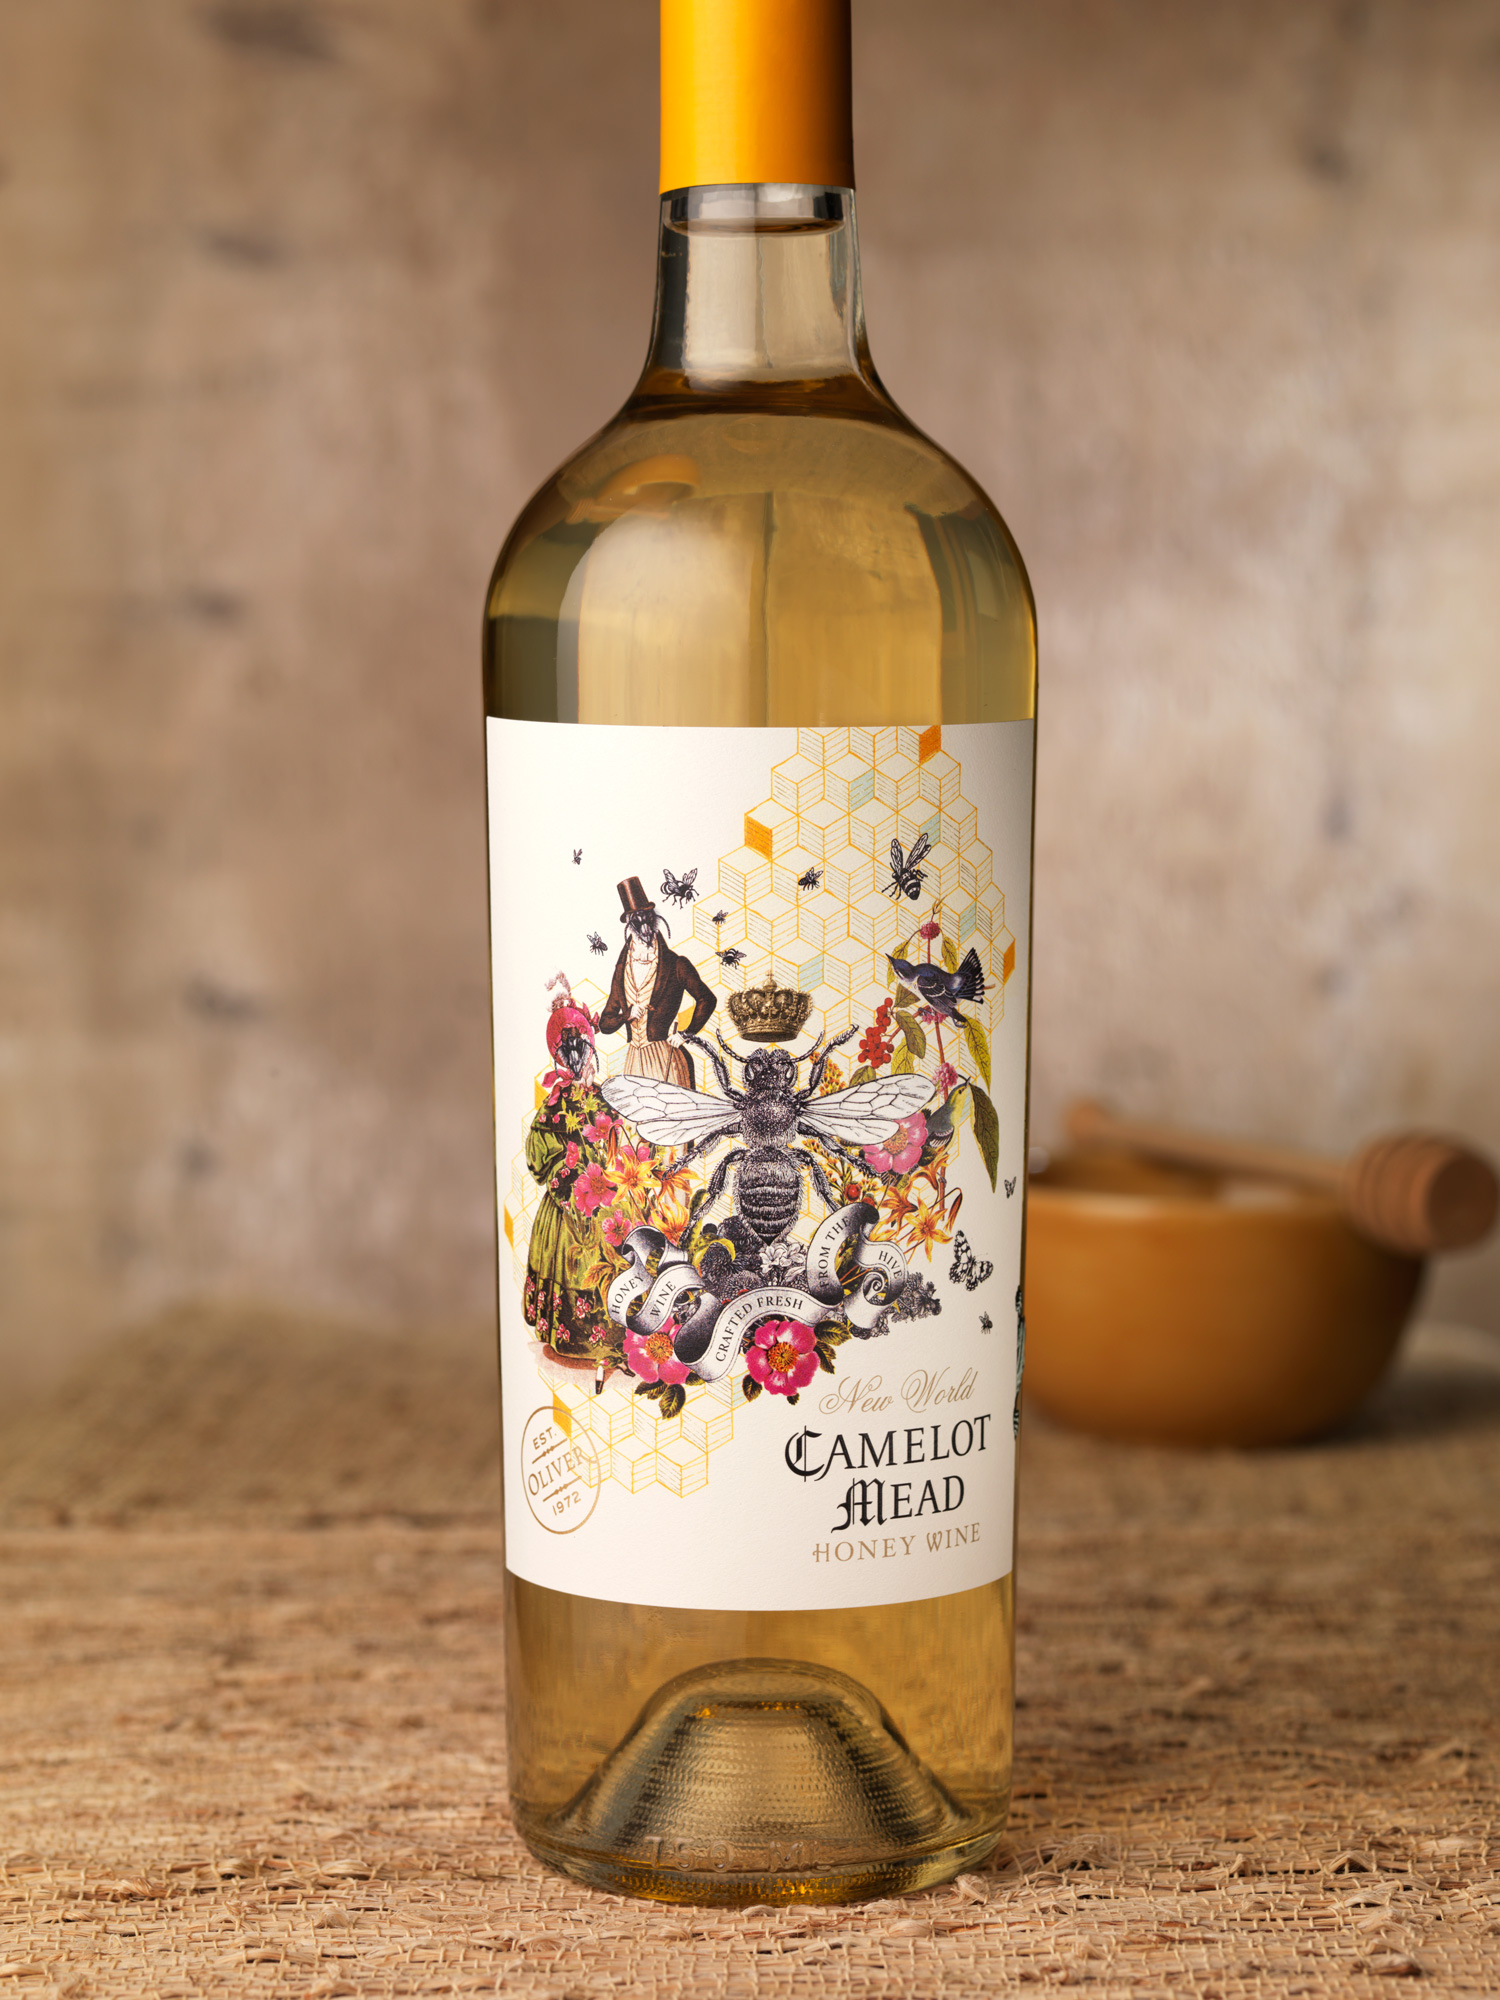 The Unique Collage of Camelot Mead Honey Wine